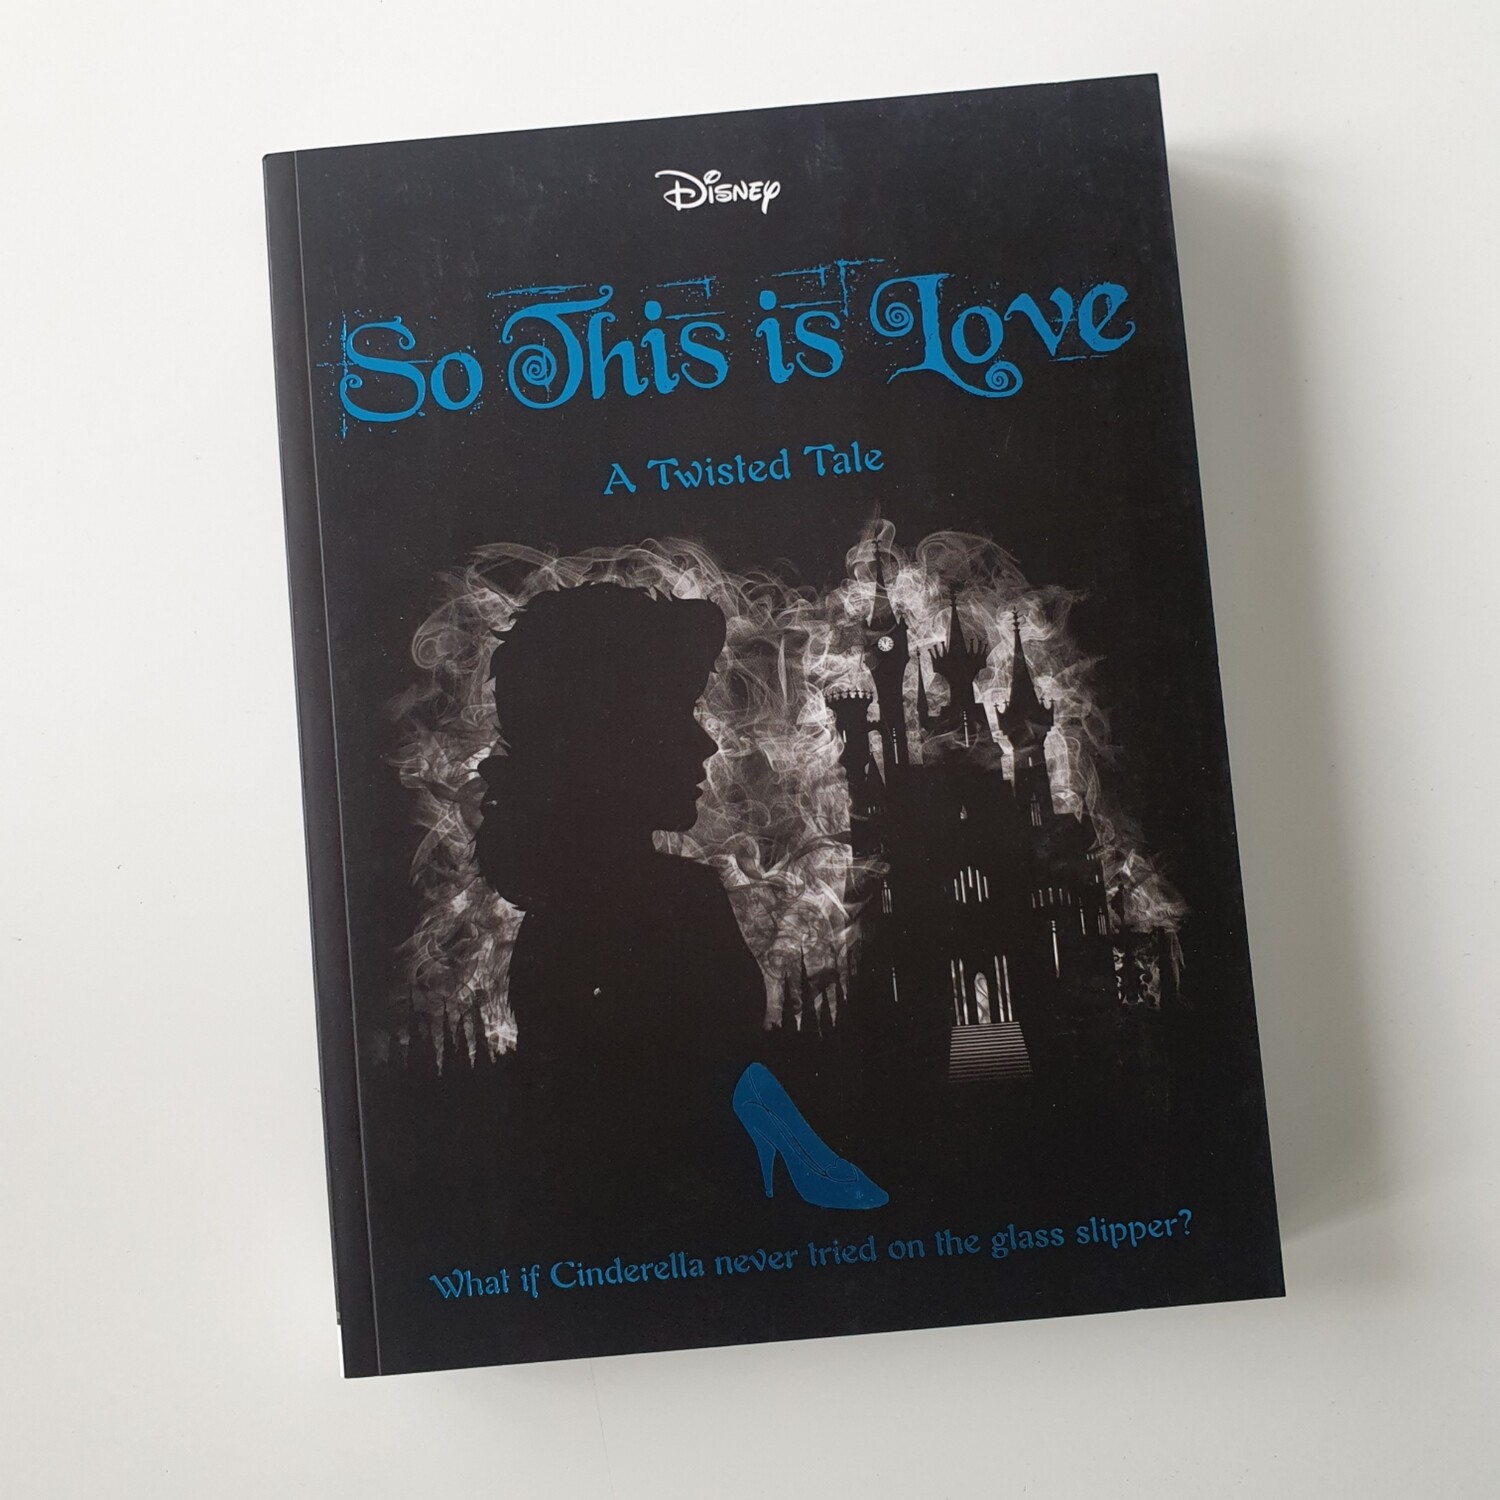 Cinderella - So This is Love - A Twisted Tale, Disney Notebook - made from a paperback book, comes with book corners